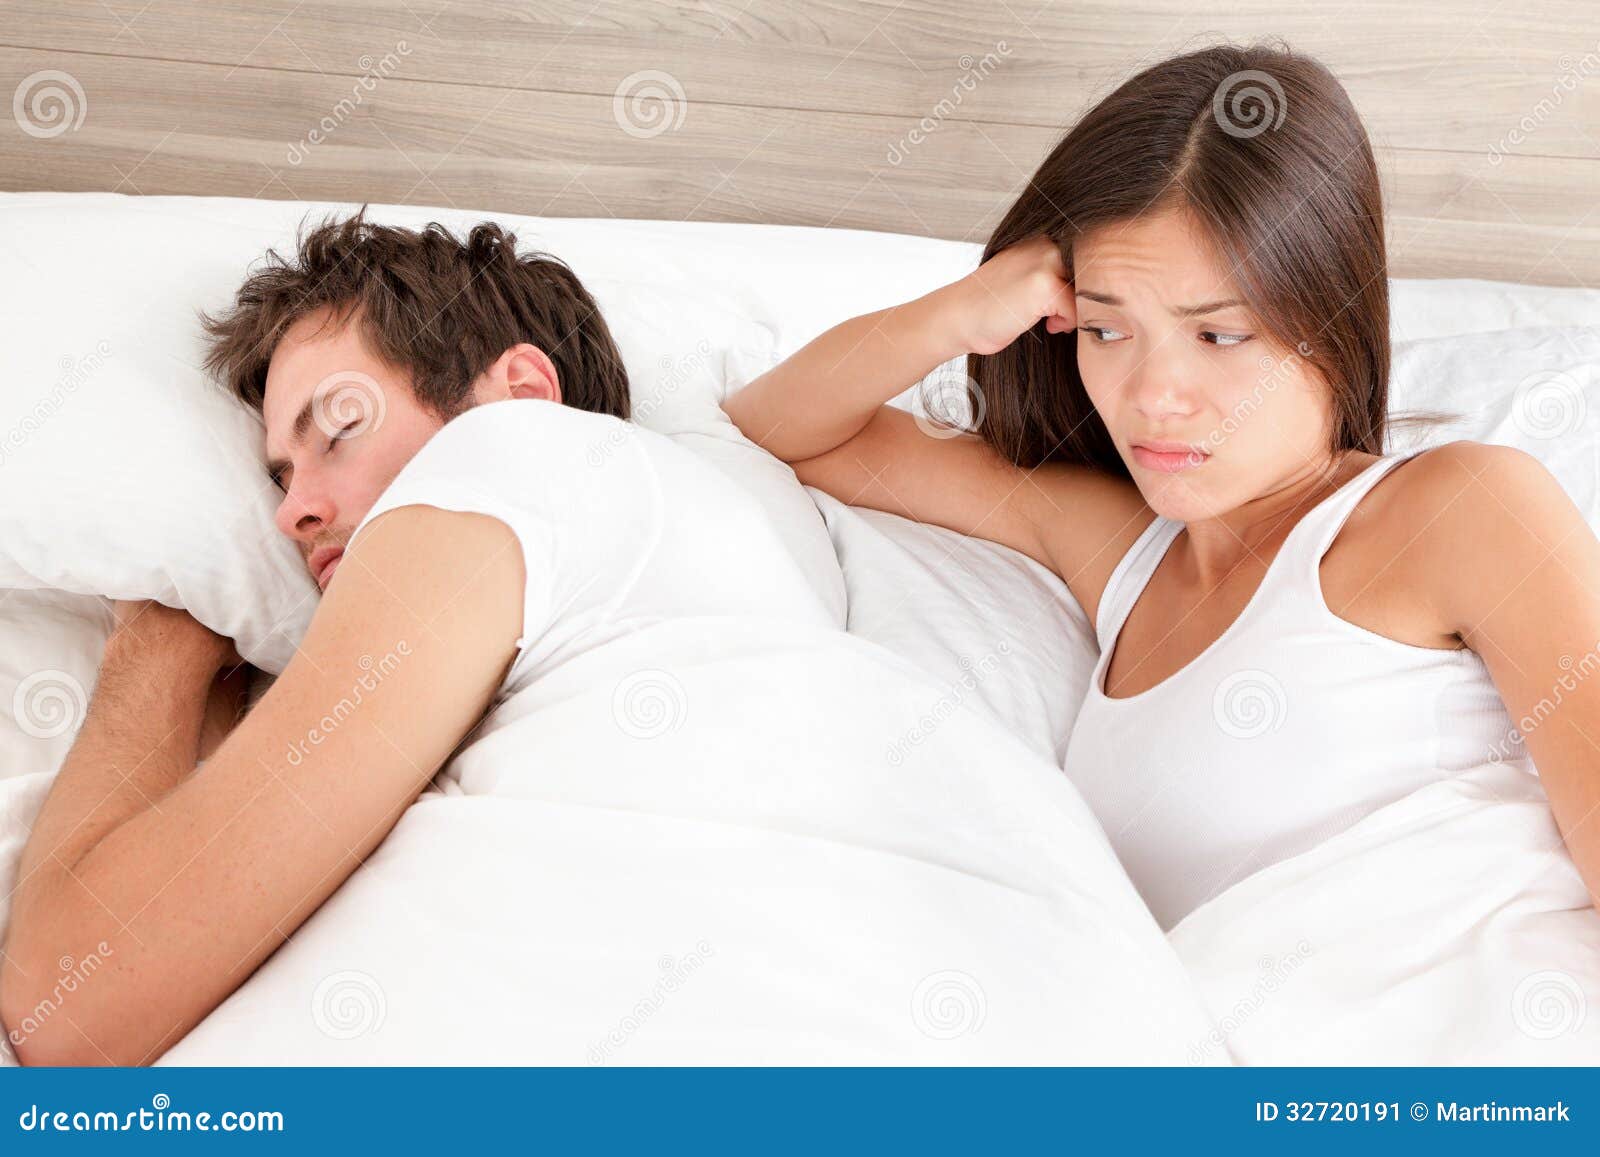 Marriage Couple Marital Problems in Bed Stock Image image picture